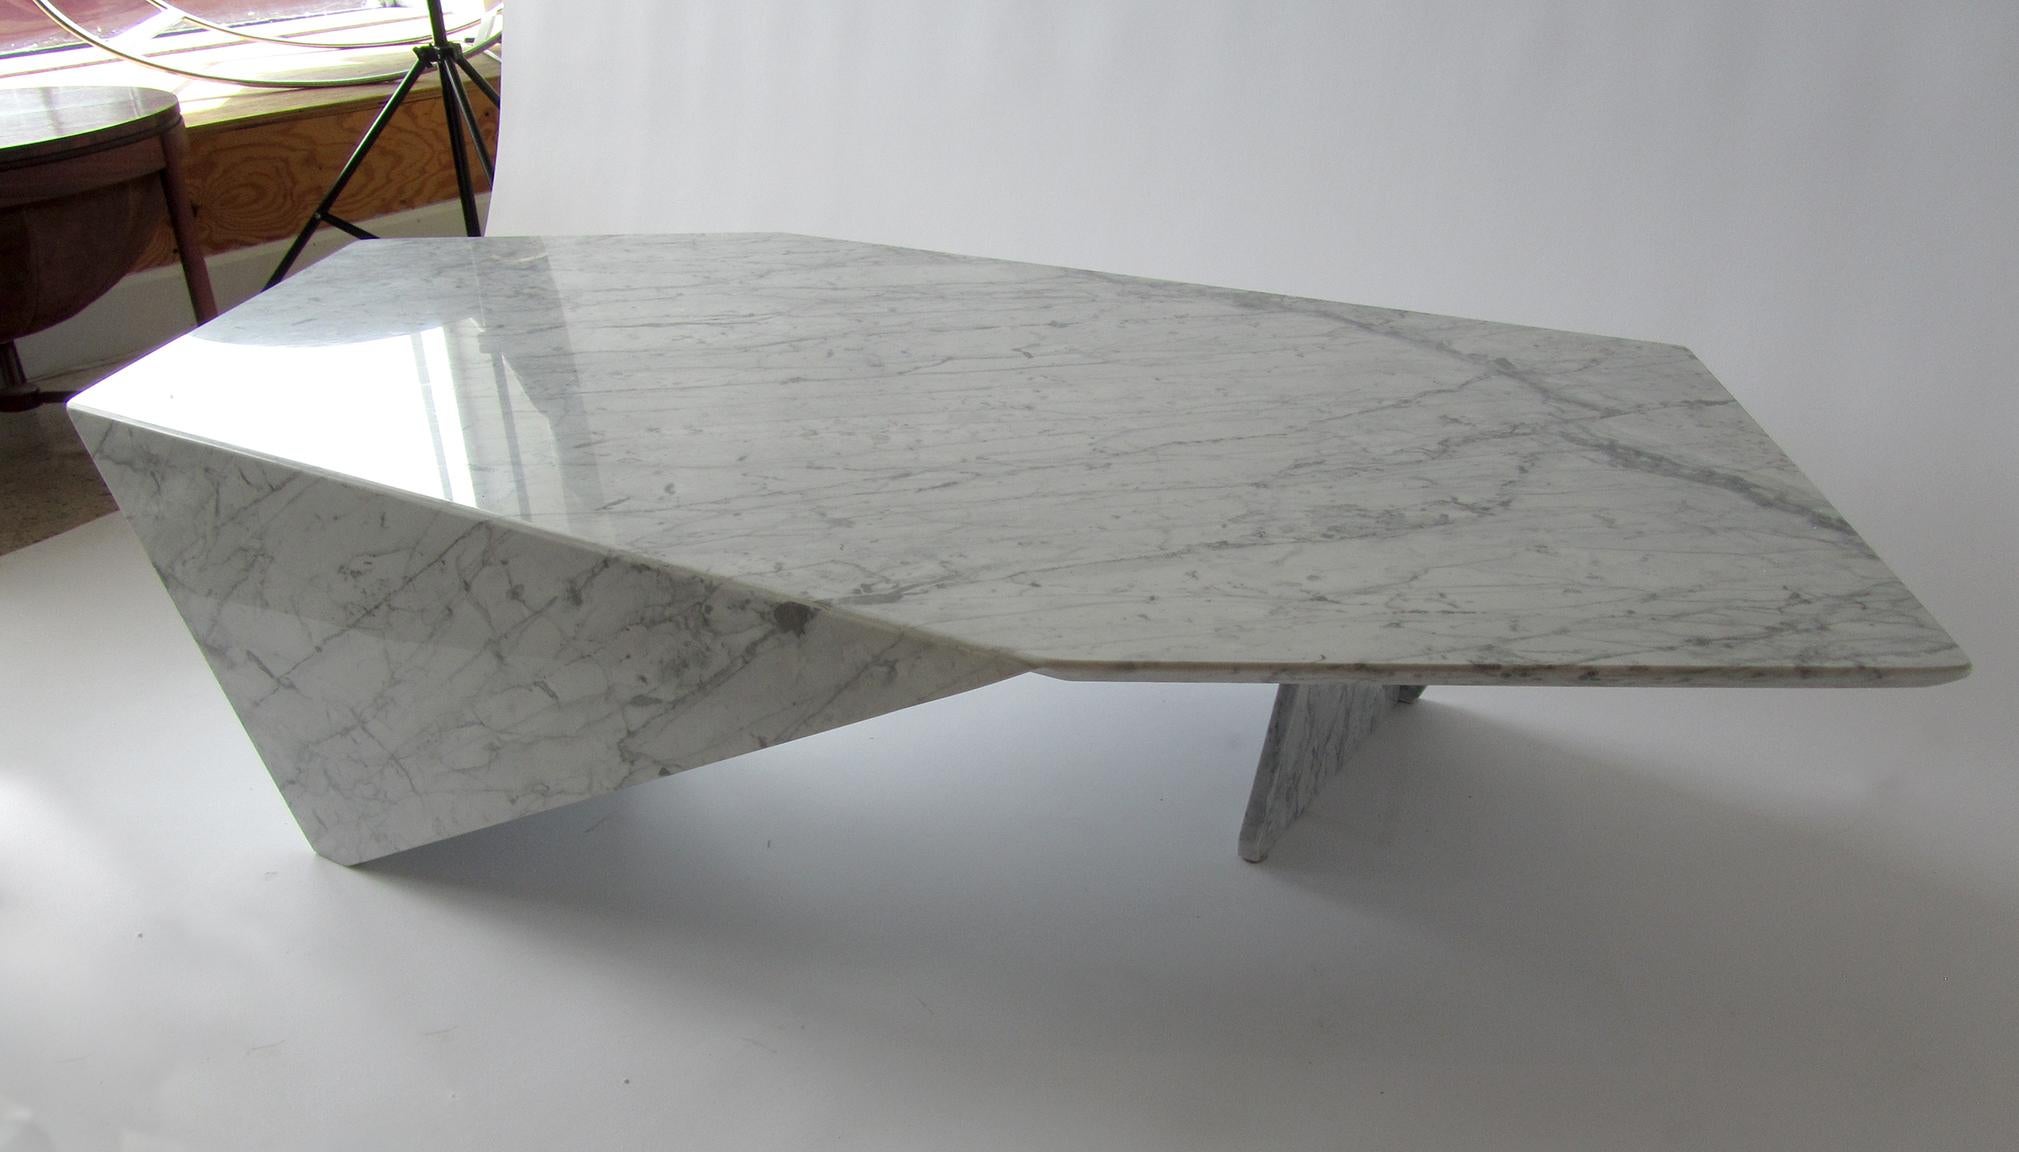 Italian Modern marble coffee table, with cantilevered edges and floating planes, produced by Minotti.